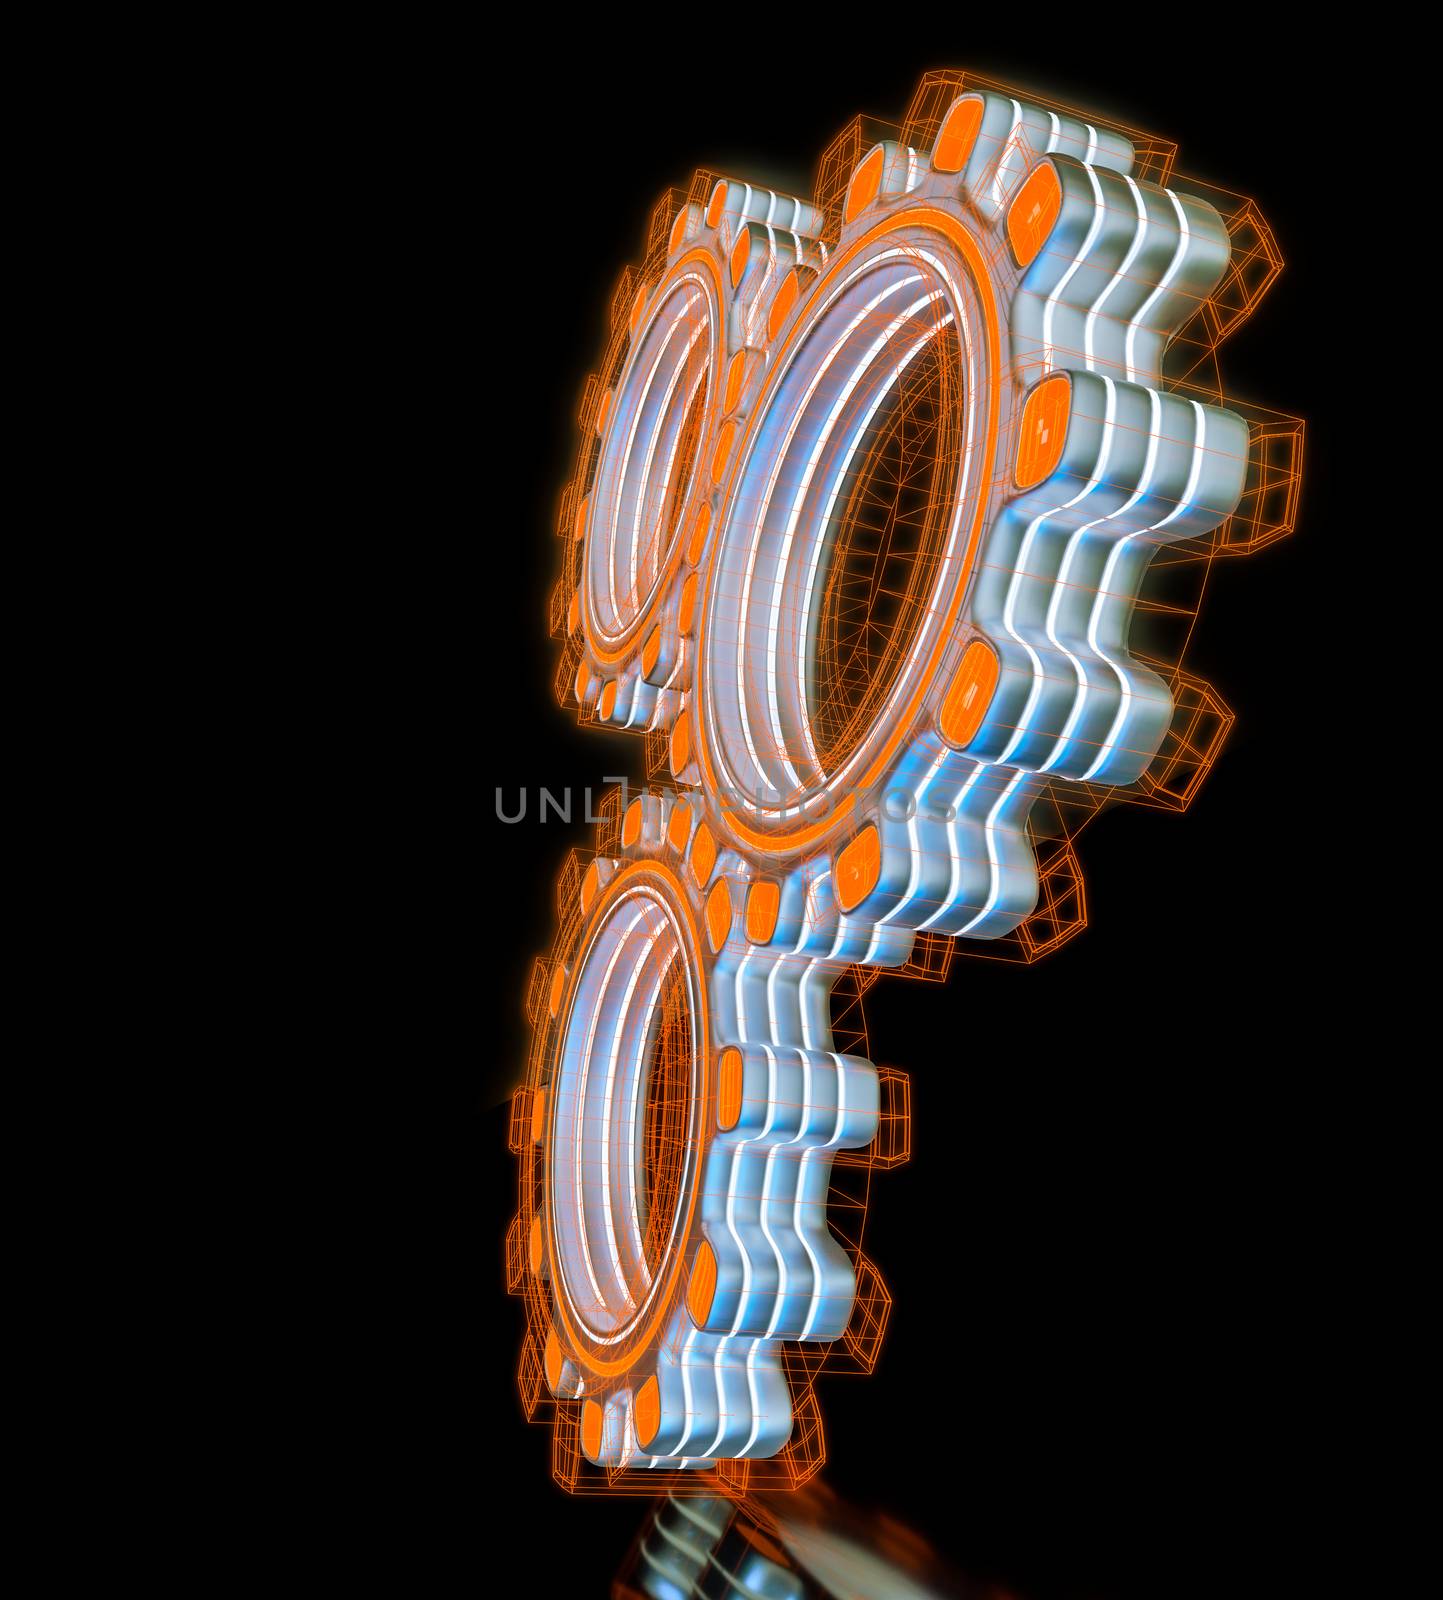 Glowing three digital gears. The concept of new technologies and teamwork. 3d illustration on a black background with reflections